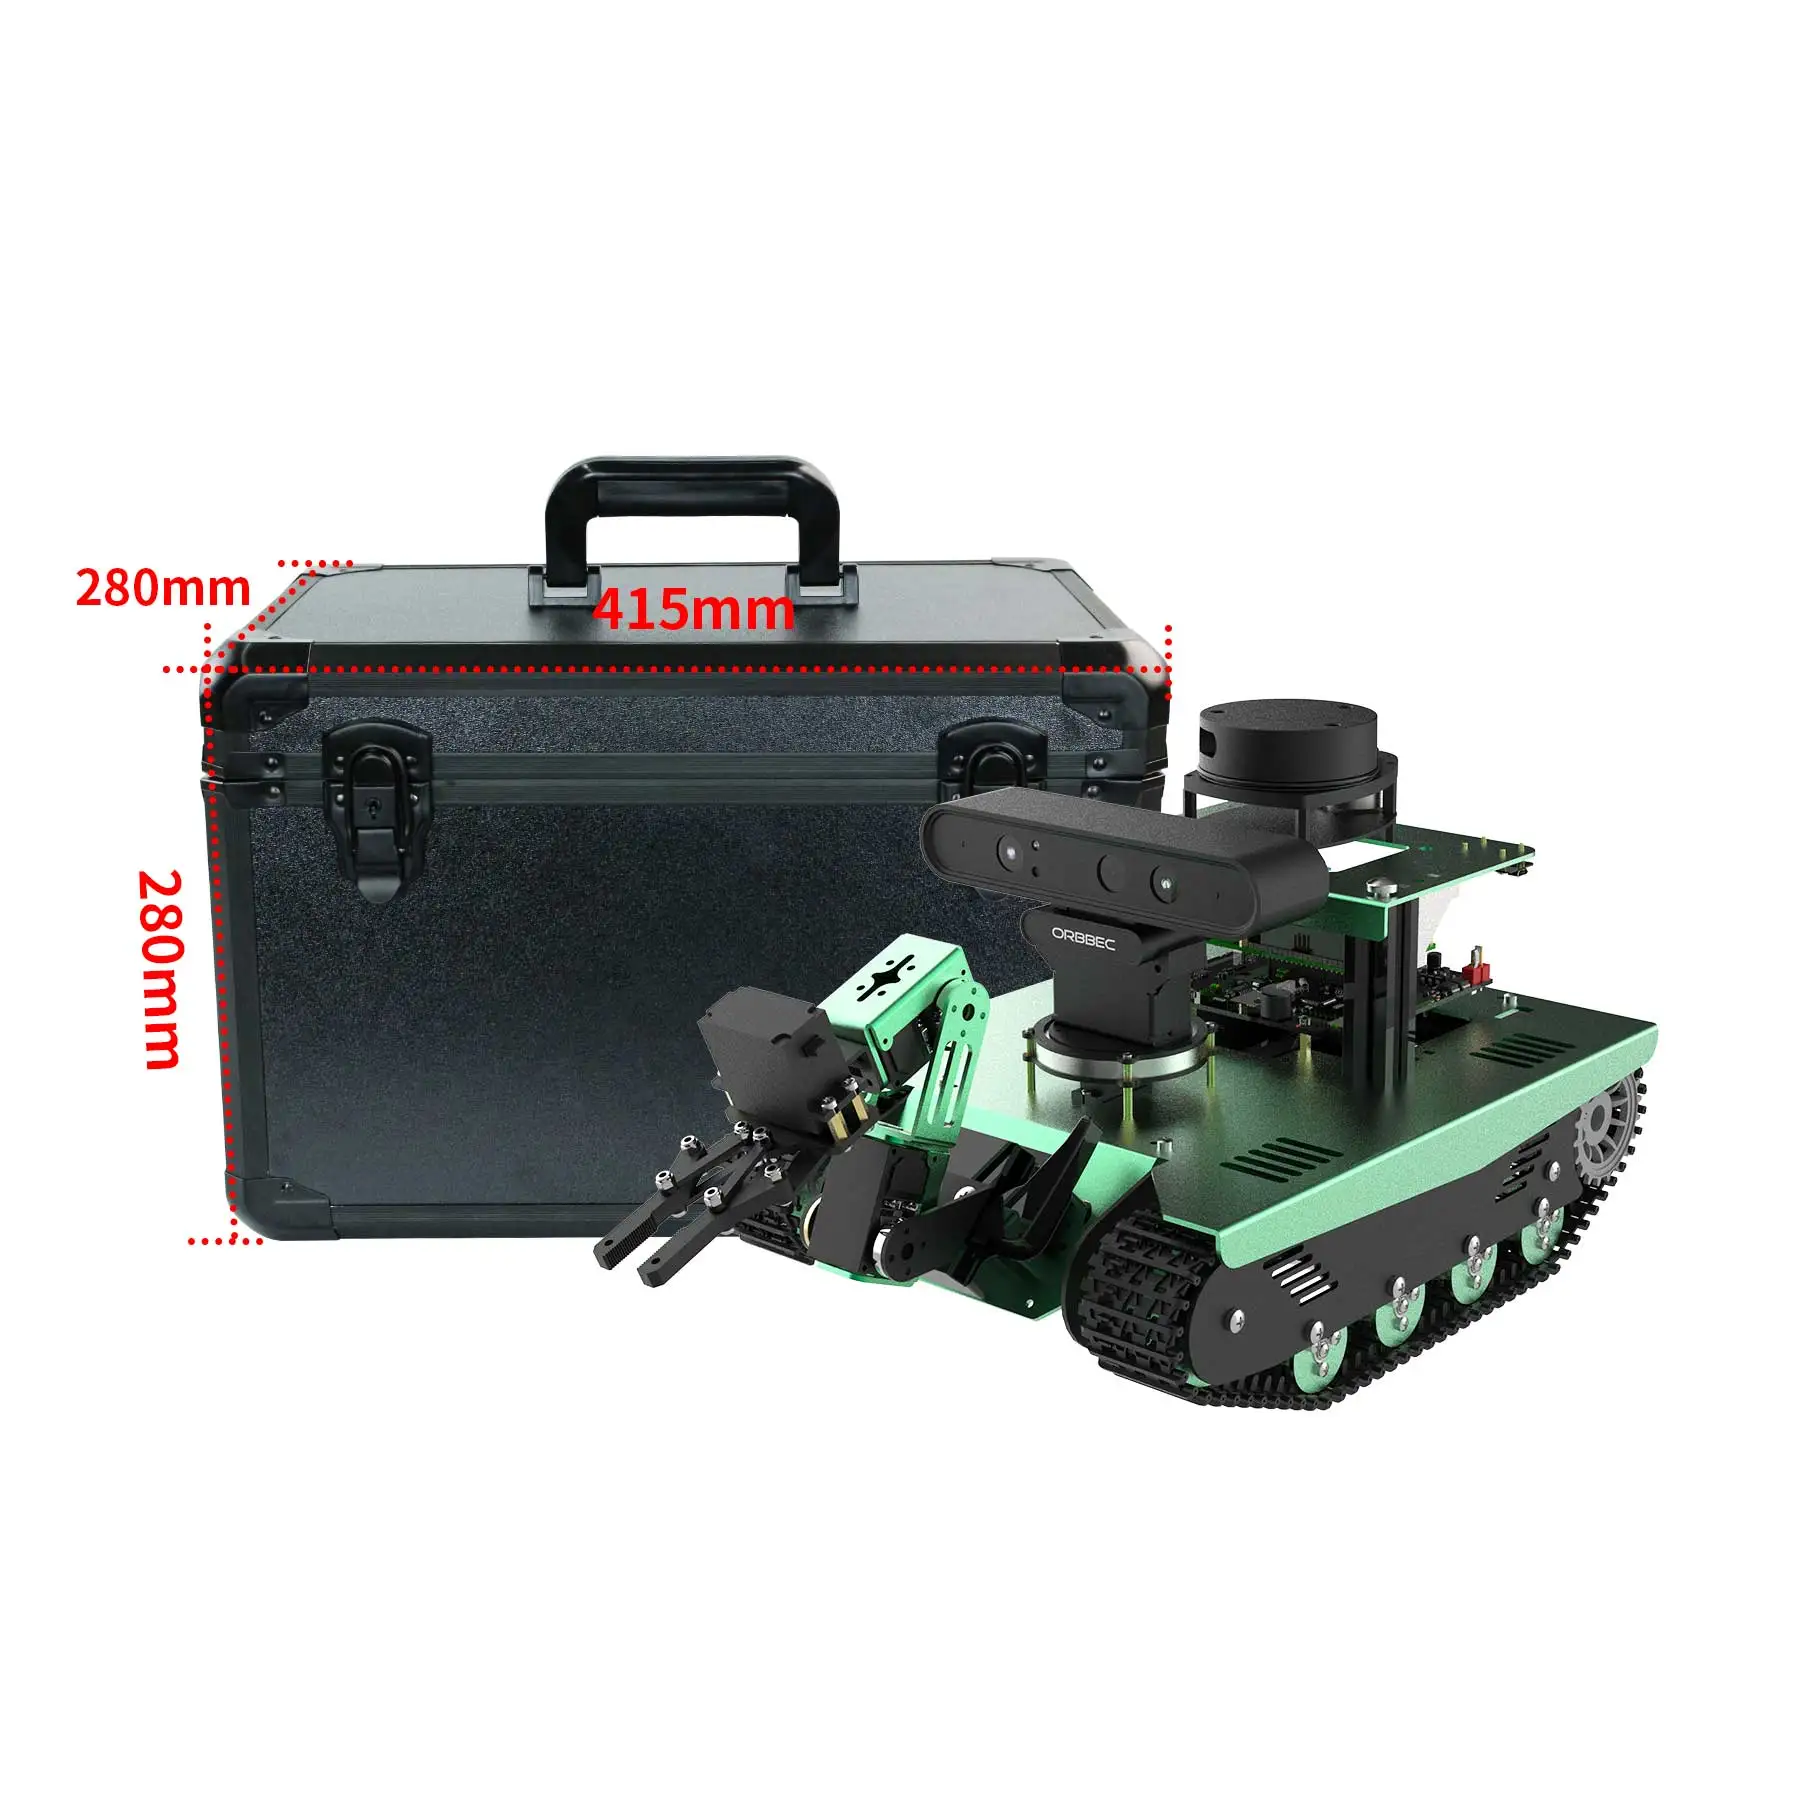 Yahboom Lidar ROS Tank Car With Robotic Arm Support 3D Mapping Navigation Autopilot Python Programming Based on Raspberry Pi 4B enlarge